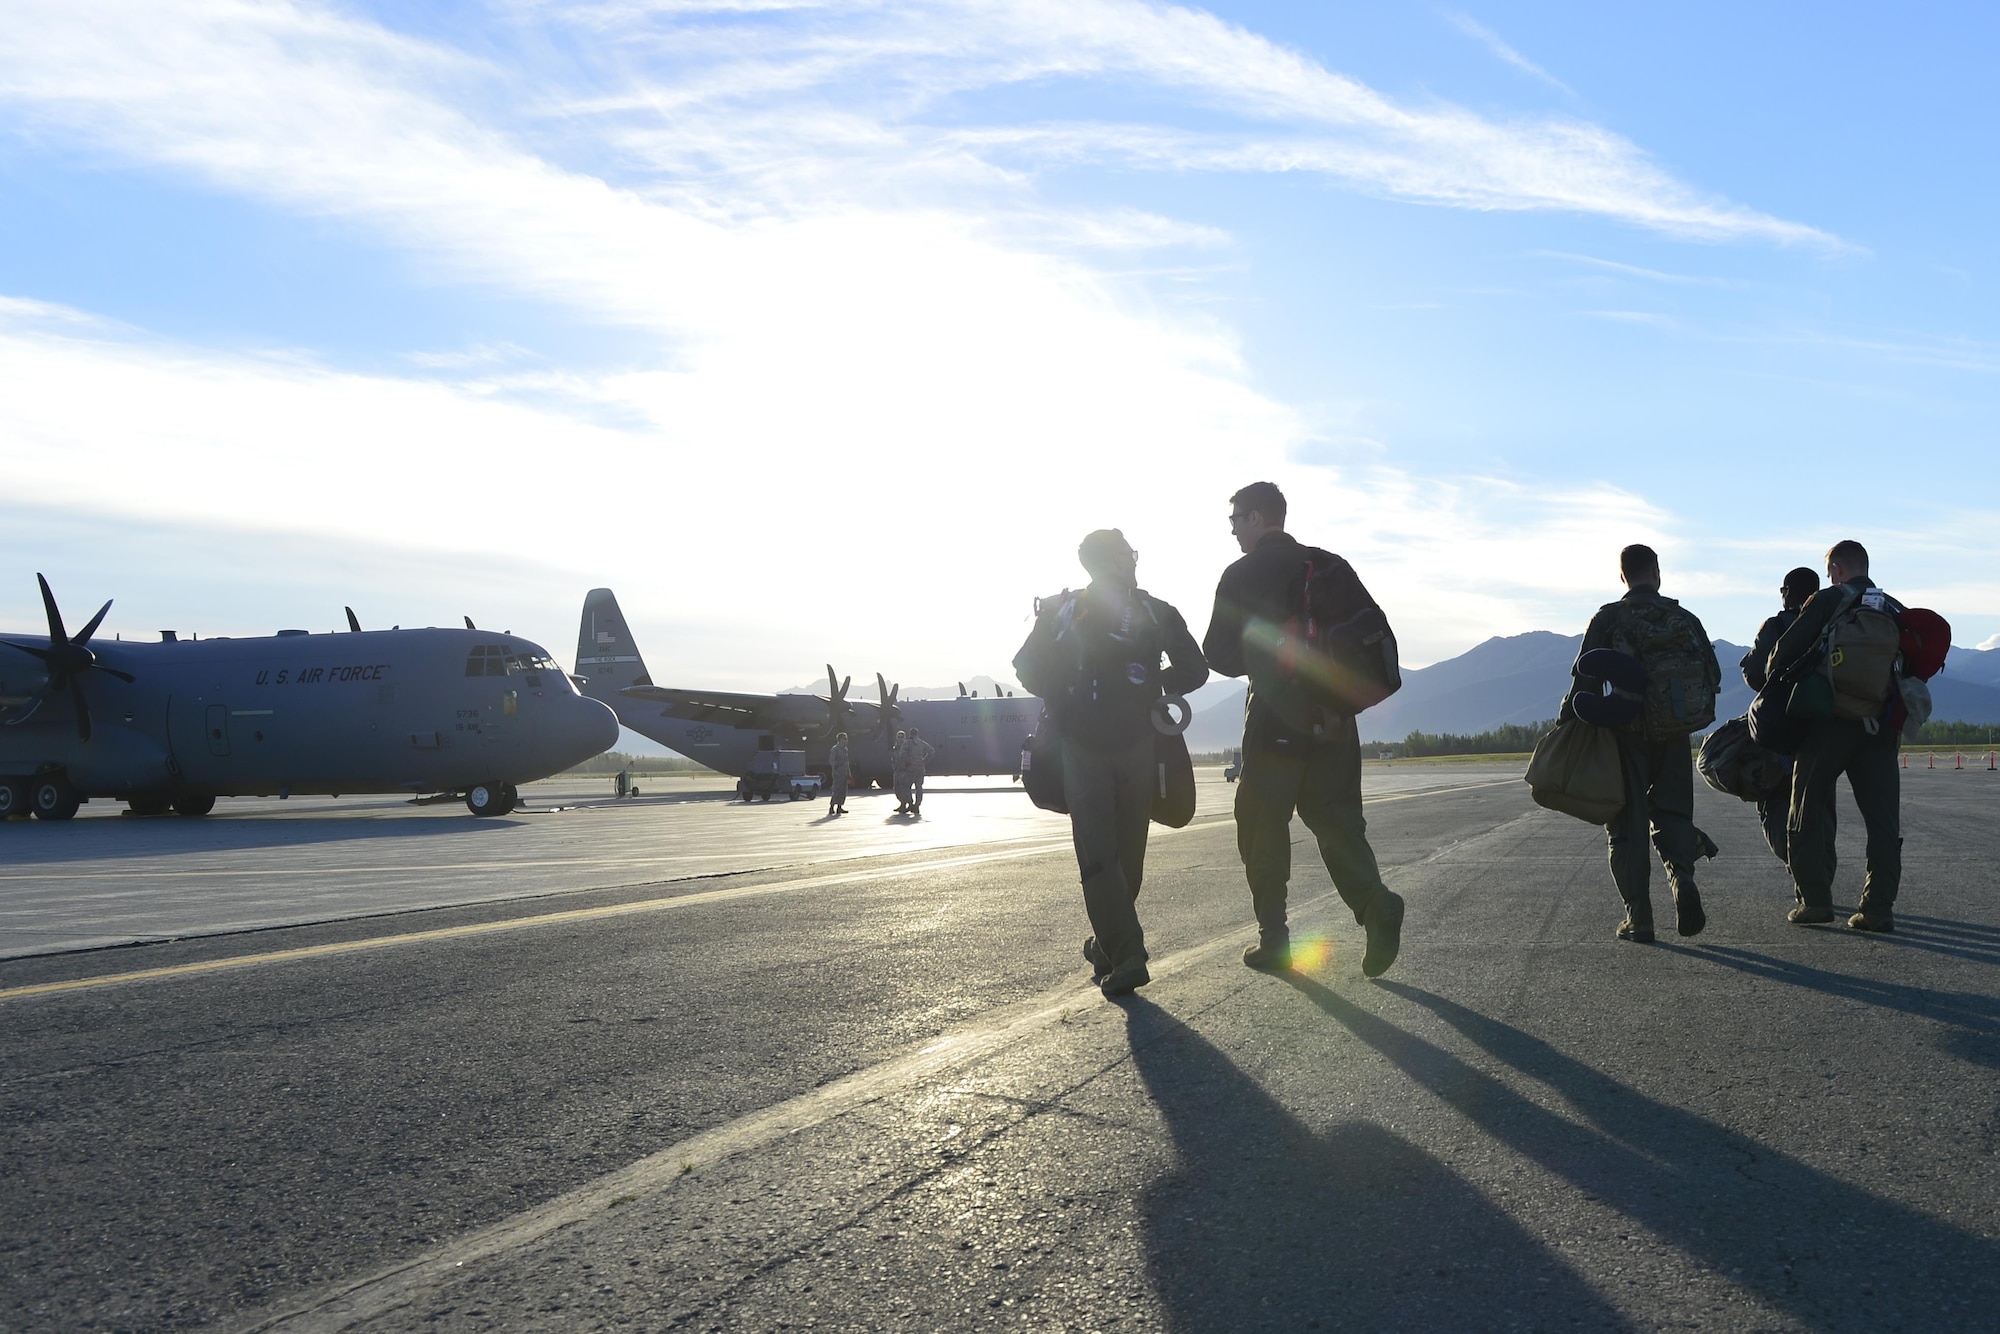 Aircrews from the 41st Airlift Squadron step to C-130Js prior to taking off on a predeployment training mission from Joint Base Elemendorf-Richardson, Alaska, July 19, 2016. The 41st AS is conducting training in Alaska to prepare for the terrain present in austere locations. Alaska provides an uncontended airspace which allows aircrews to train more effectively without having to adjust to commercial flight patterns. (U.S. Air Force photo by Senior Airman Kaylee Clark)